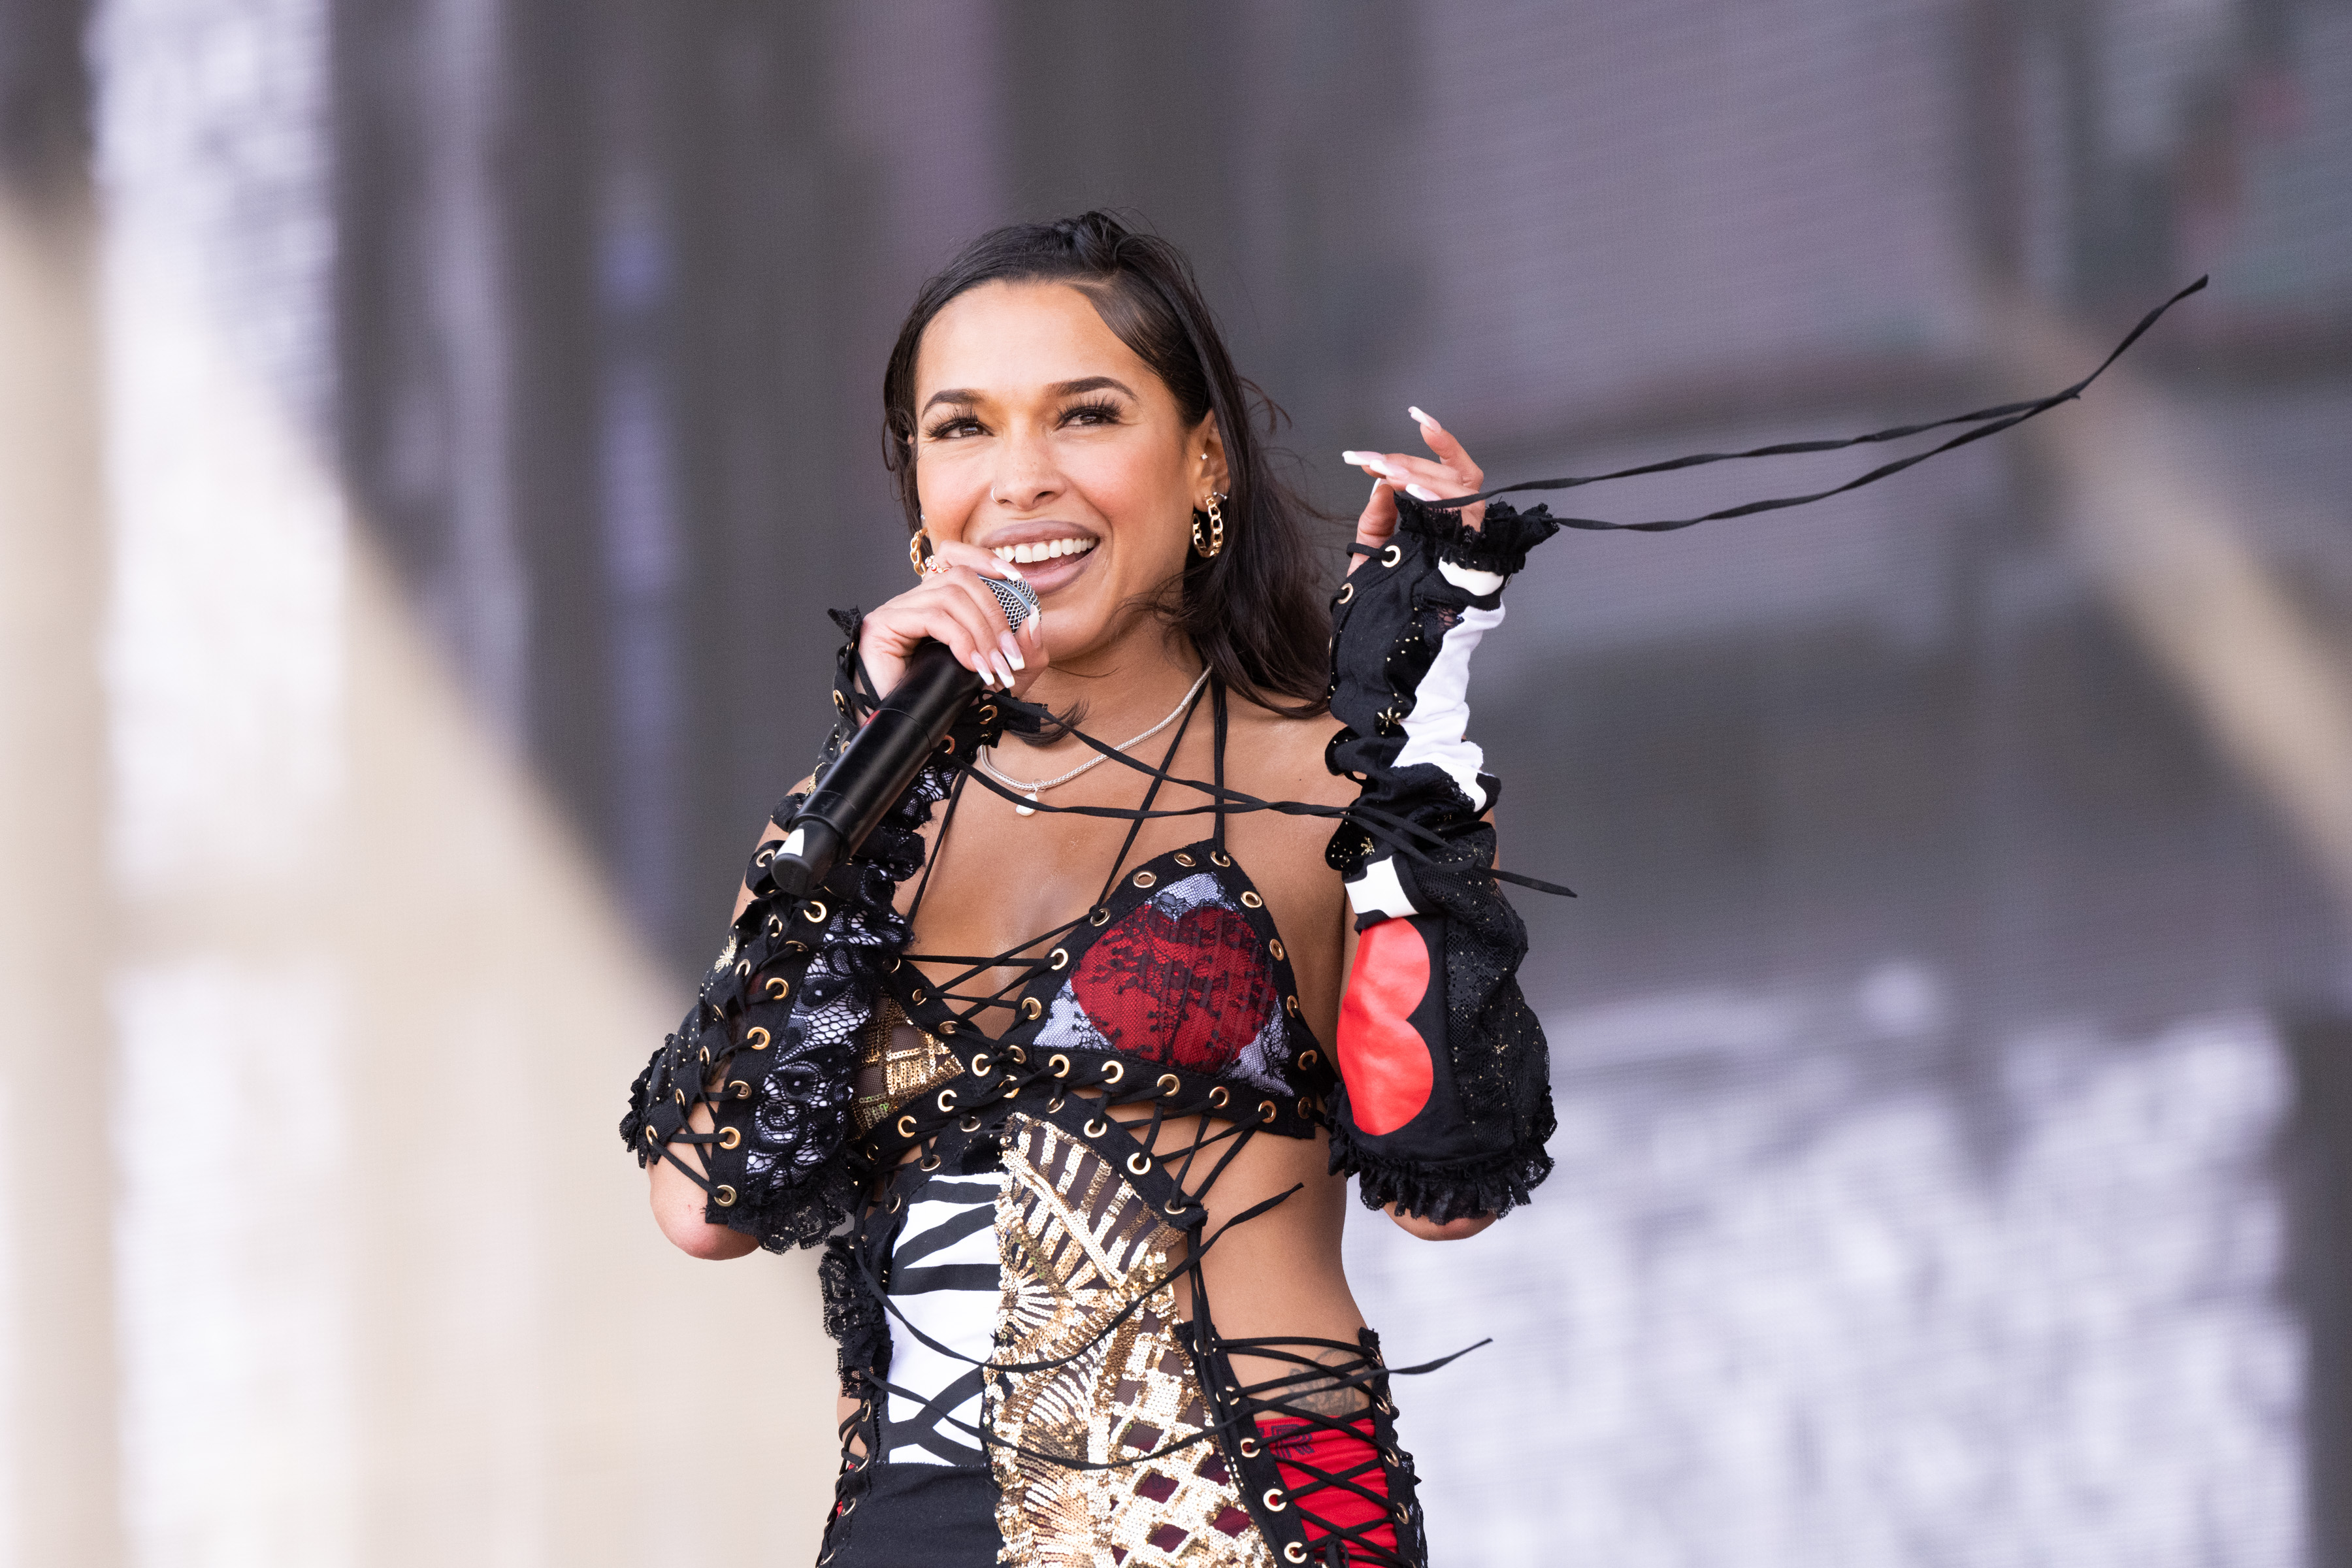 Princess Nokia is photographed during her performance on The Main Stage on Day 1, Week 2 of Coachella Valley Music and Arts Festival on April 22, 2022, in Indio, California | Source: Getty Images